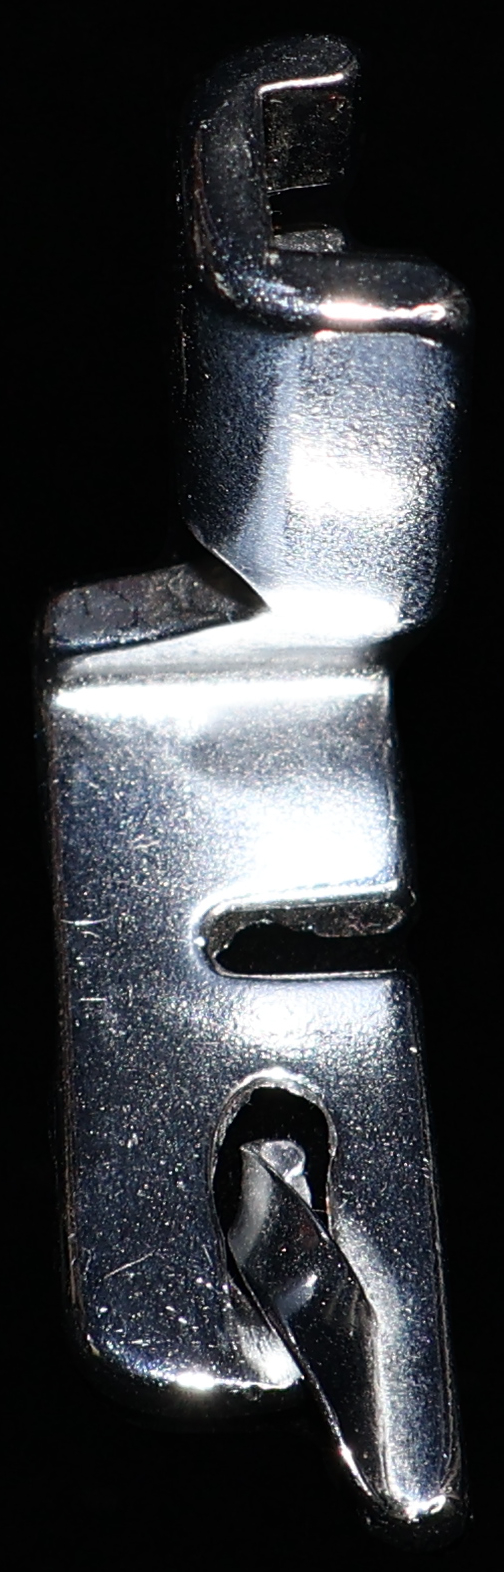 Image of a Rolled Hem foot for a sewing machine